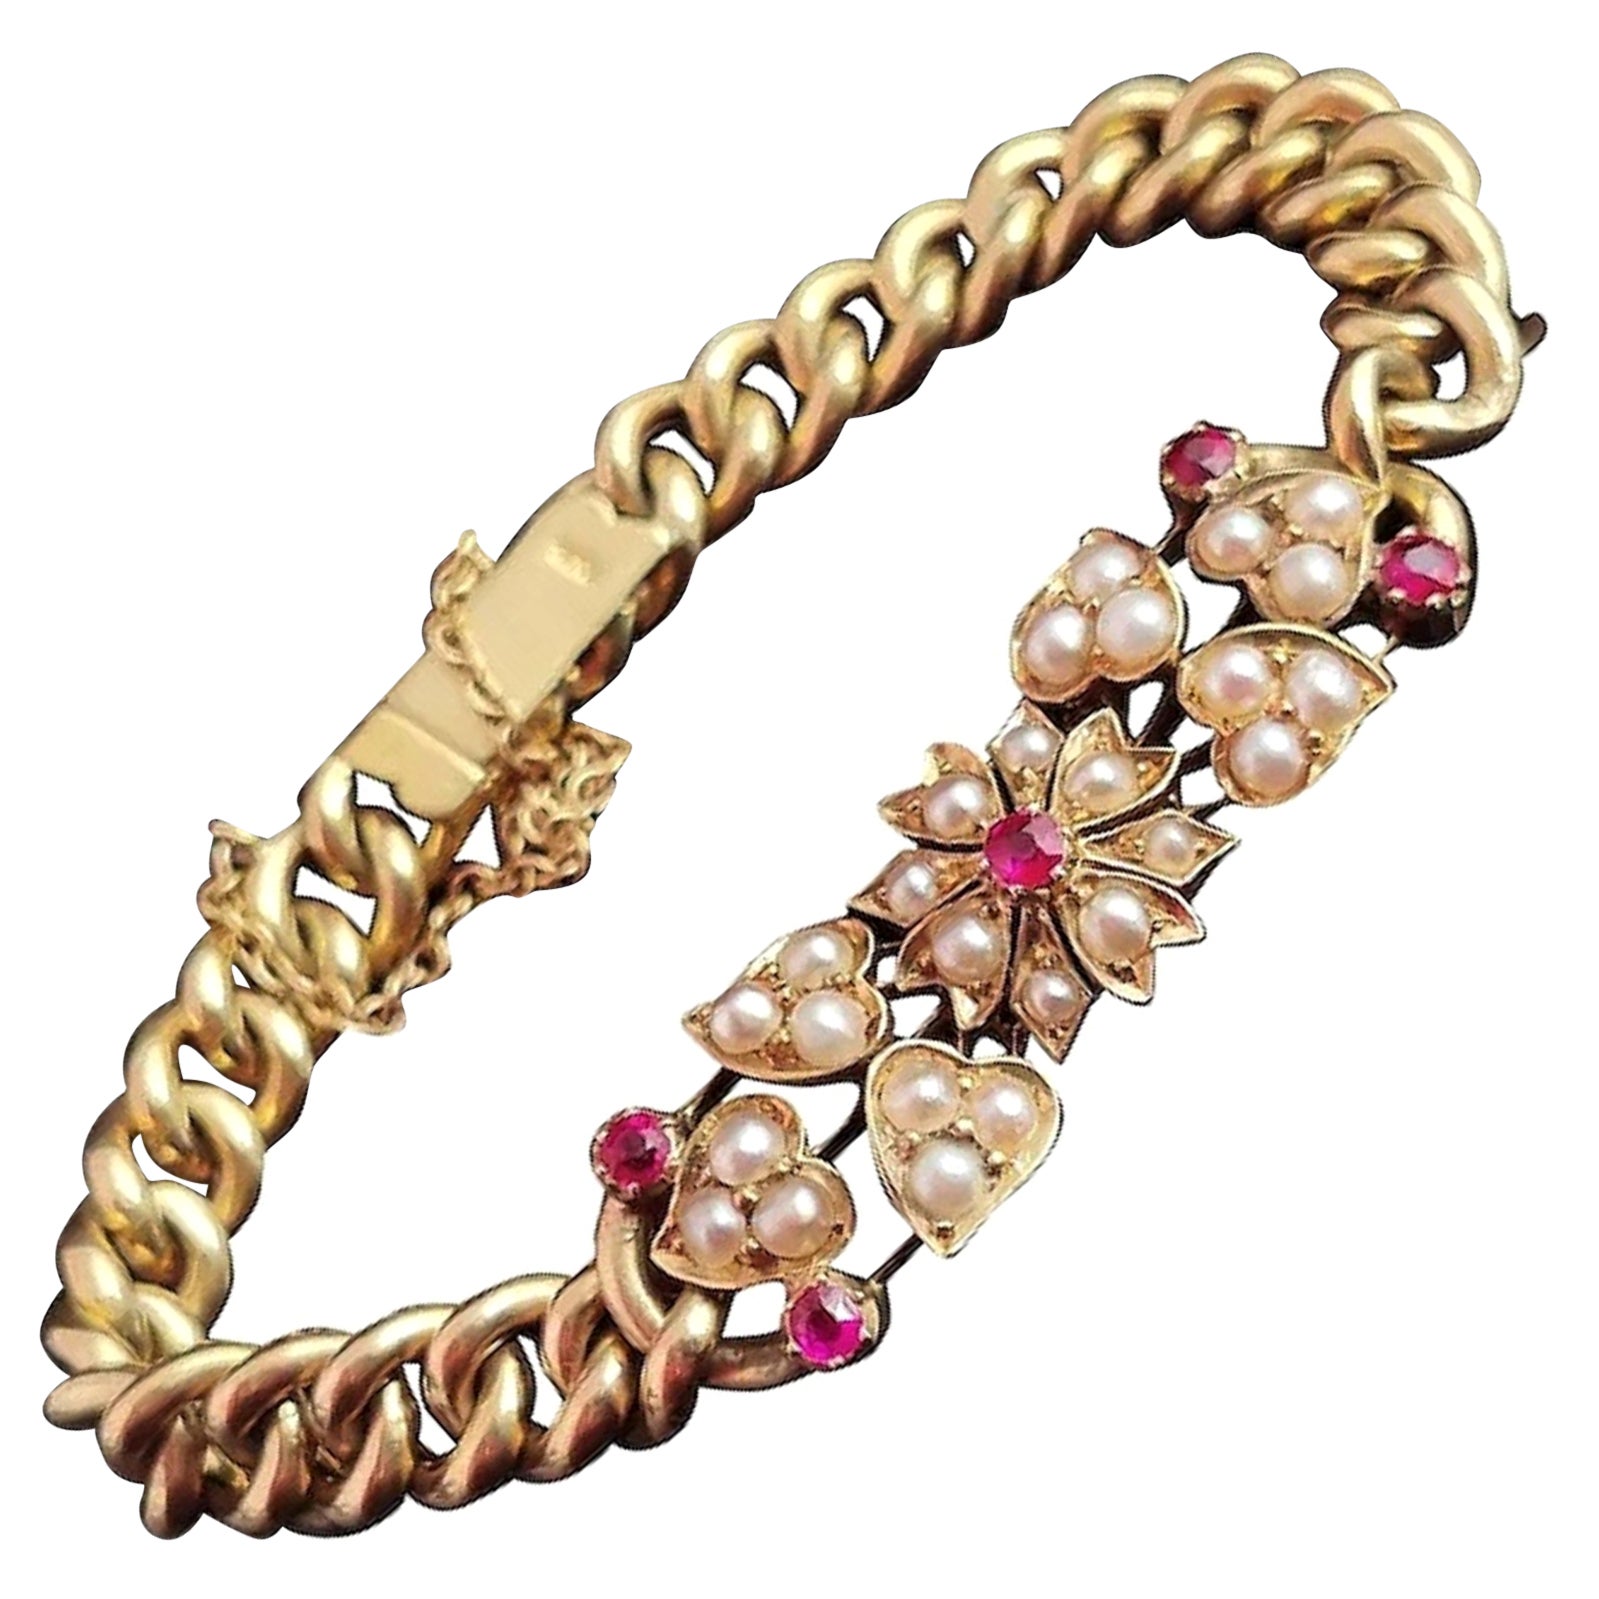 Antique 15 Karat Yellow Gold Curb Bracelet, Ruby and Pearl, Floral, Edwardian